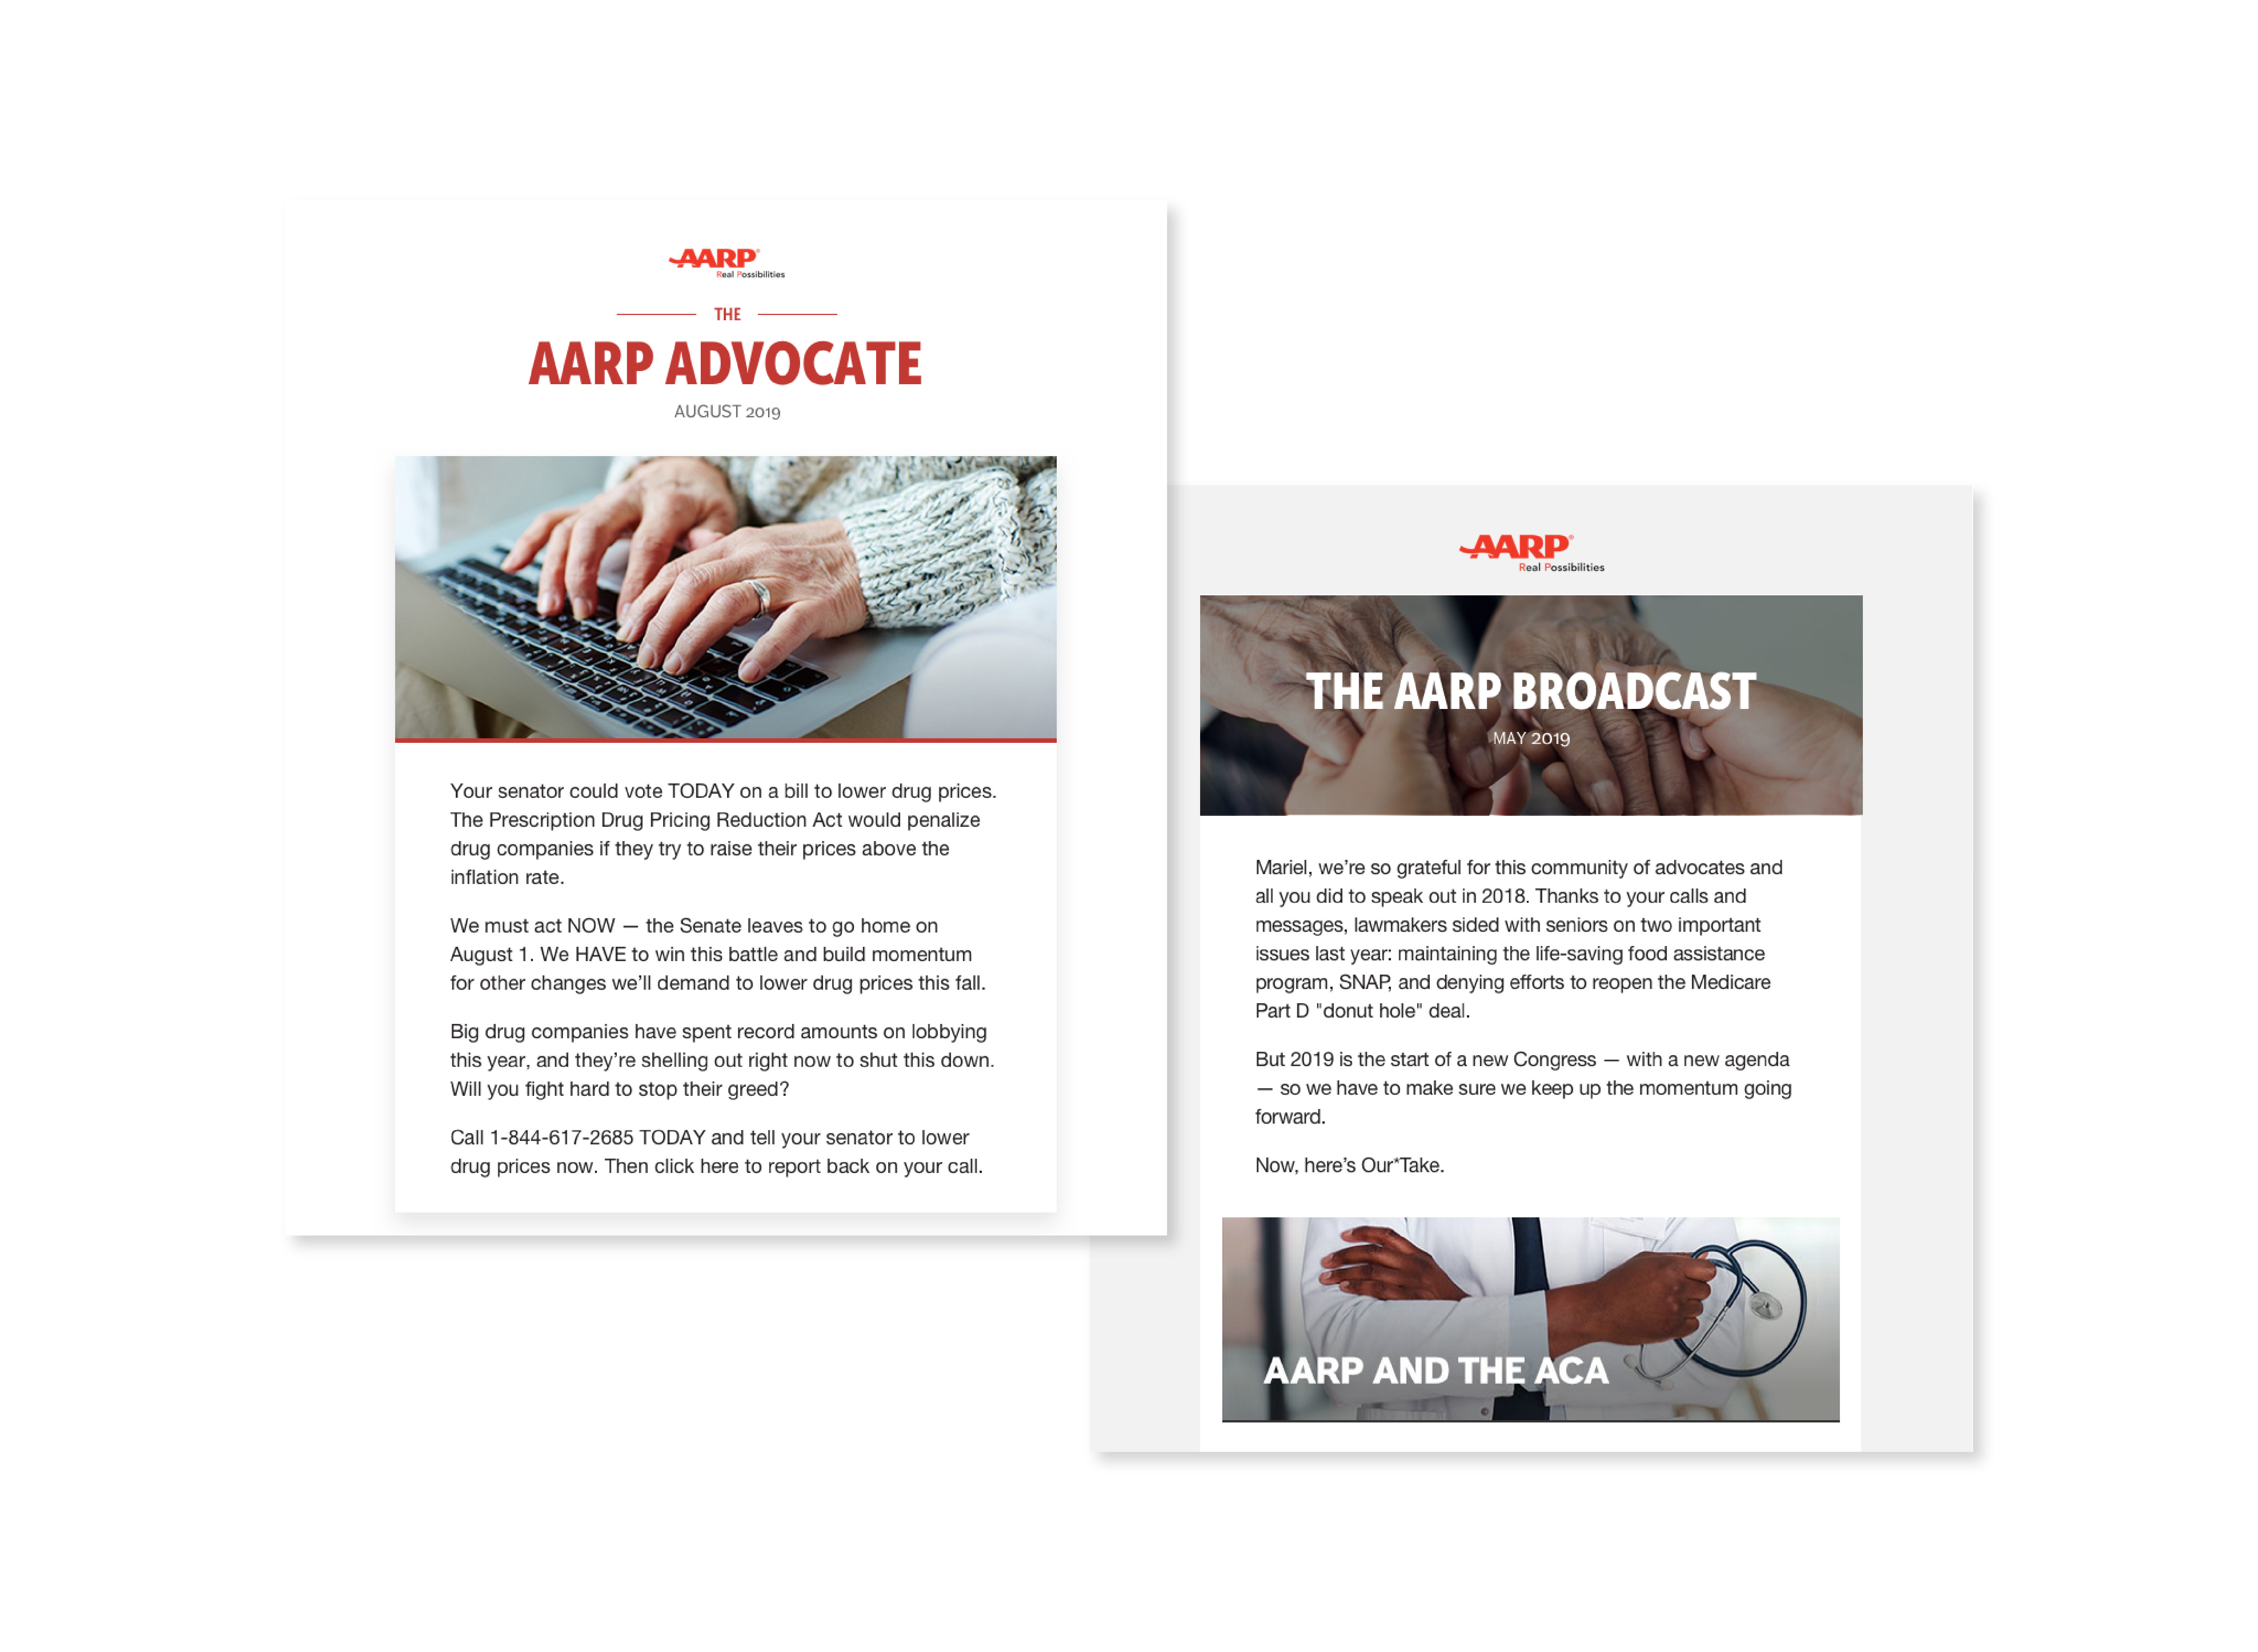 Two emails from the AARP campaign